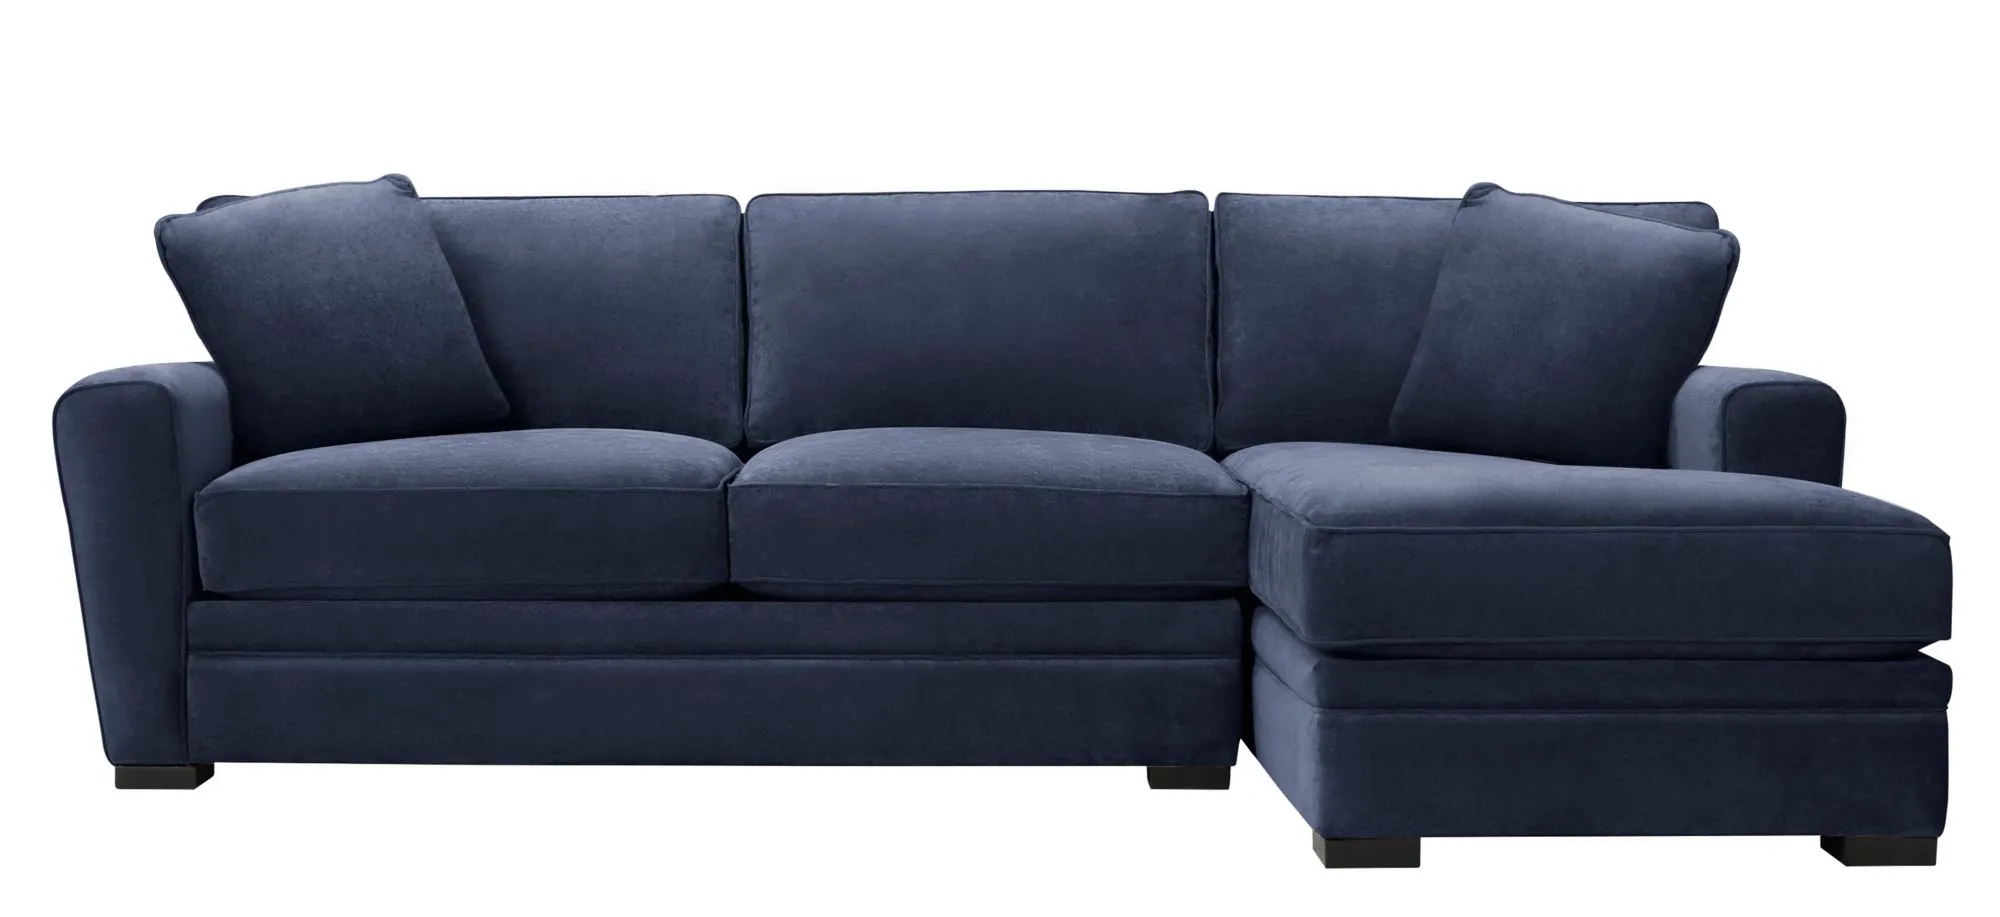 Artemis II 2-pc. Right Hand Facing Sectional Sofa in Gypsy Navy by Jonathan Louis